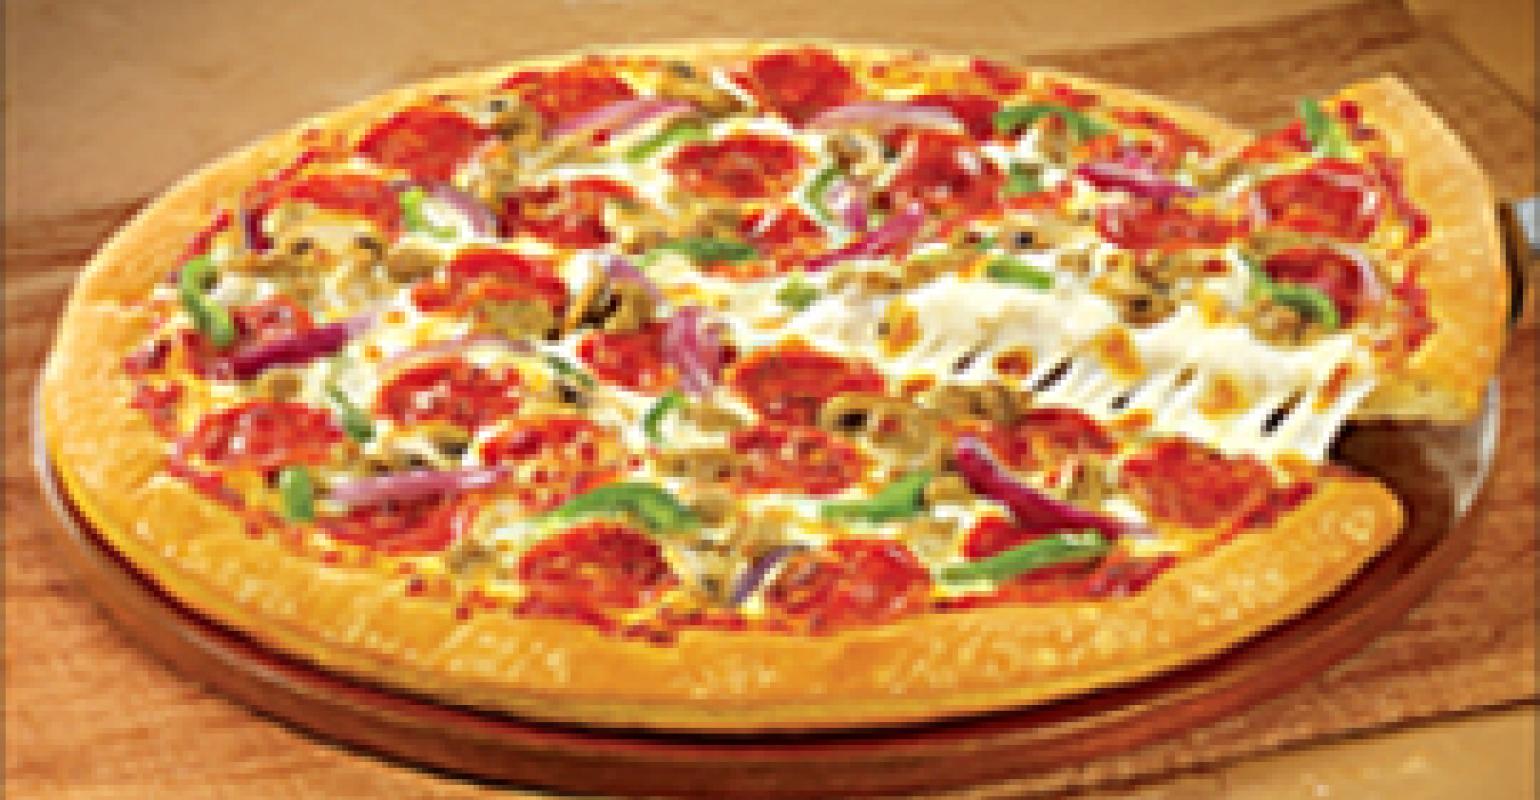 Pizza Hut aims 'tossed' crust at rivals' market ambitions - Nation's ...